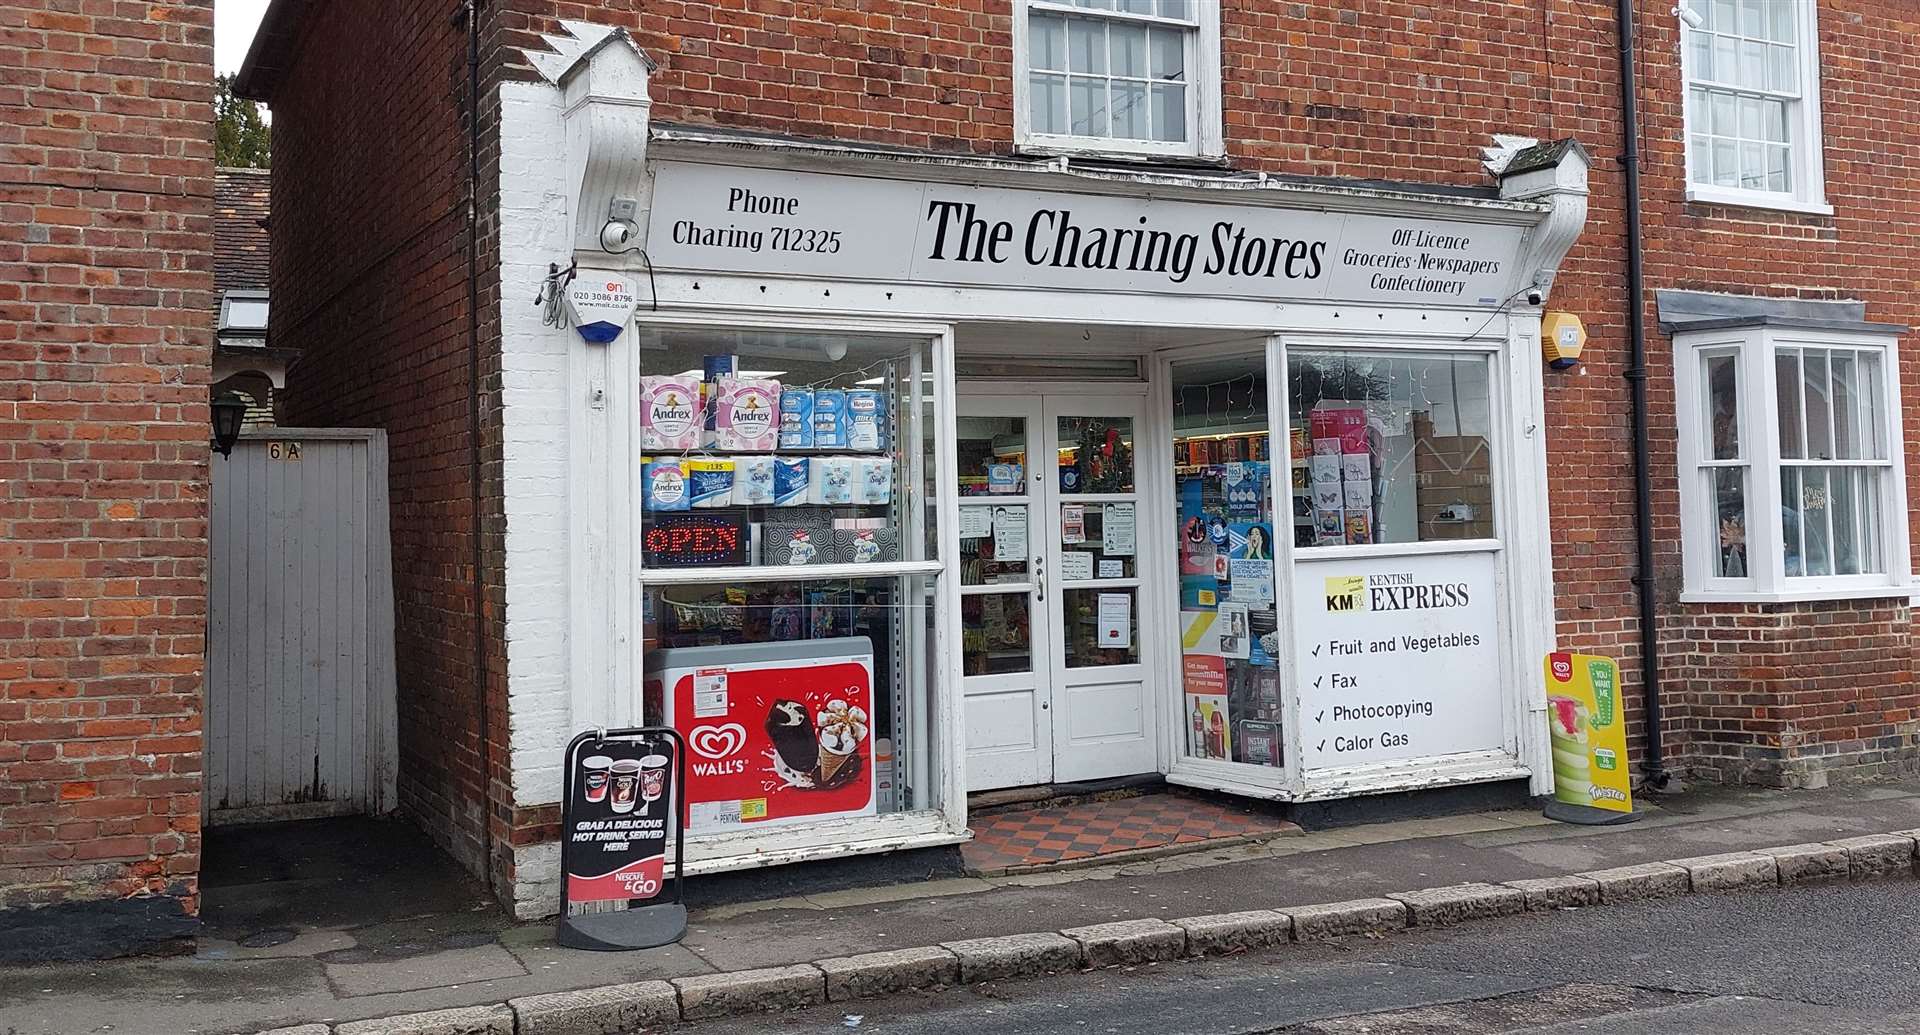 The incident happened at The Charing Stores in the high street